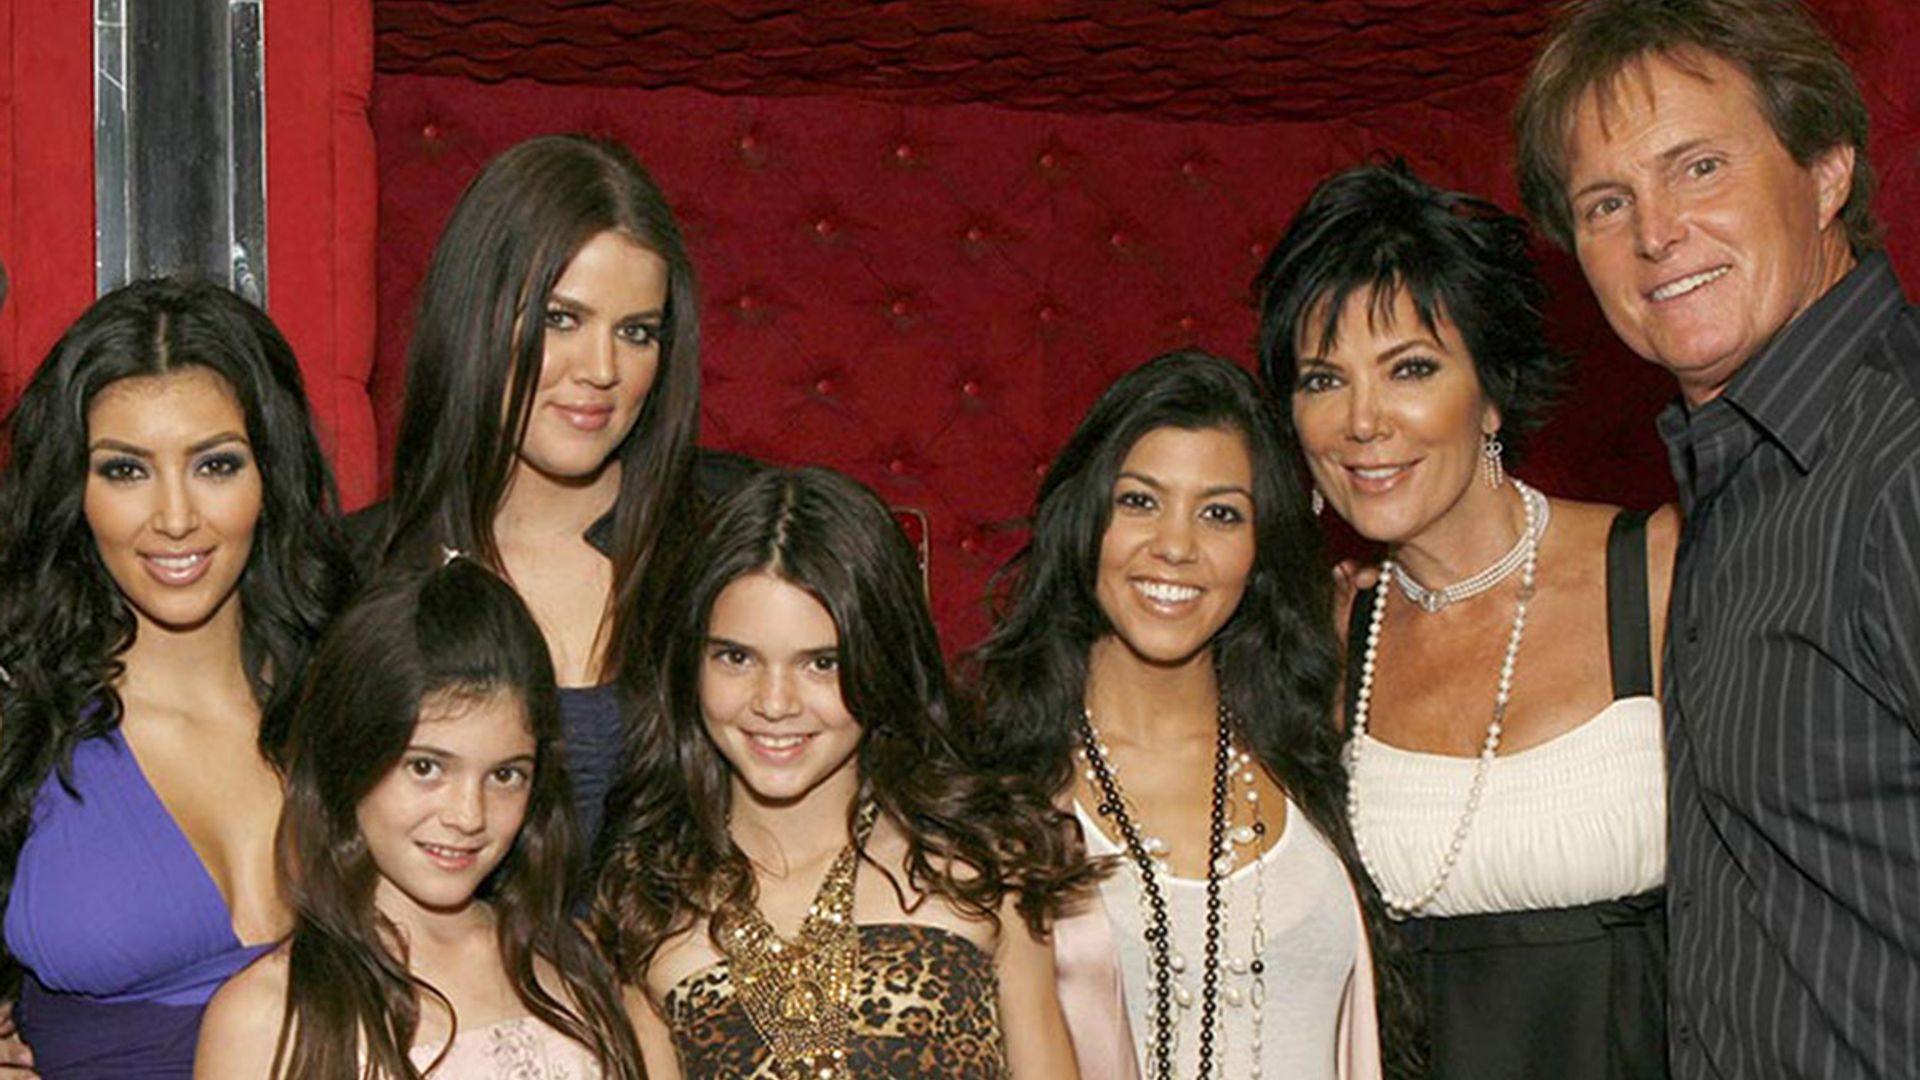 Fans devastated after Keeping Up with the Kardashians is cancelled after 14 years